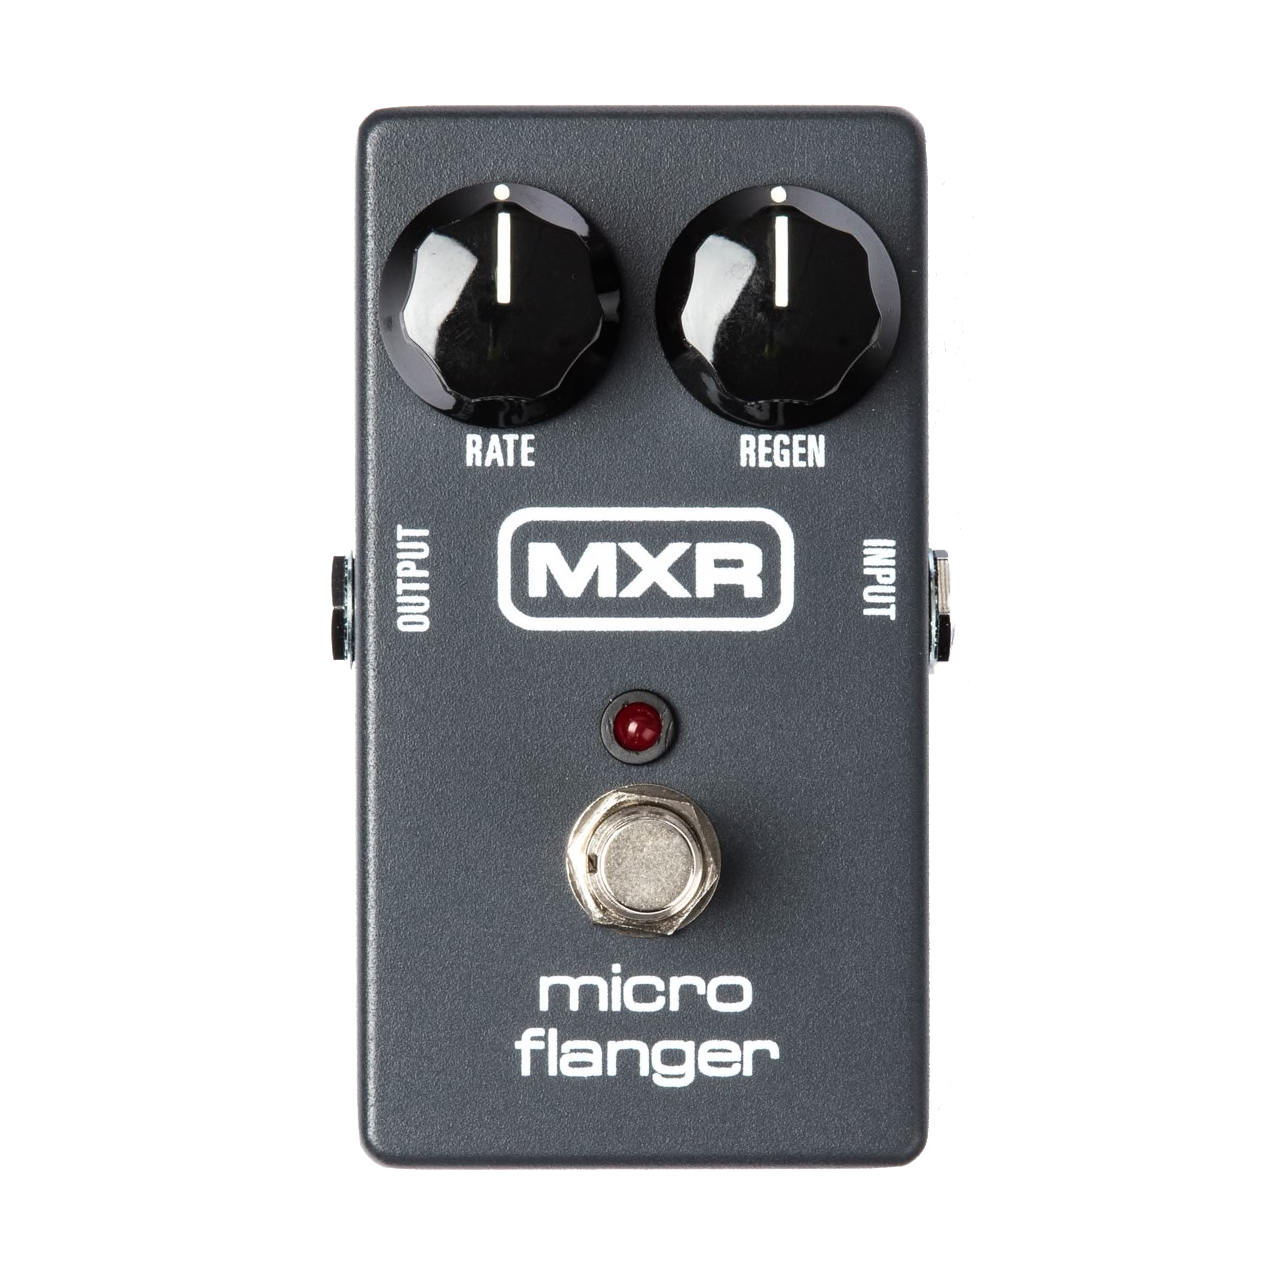 Top down of MXR M152 Micro Flanger.